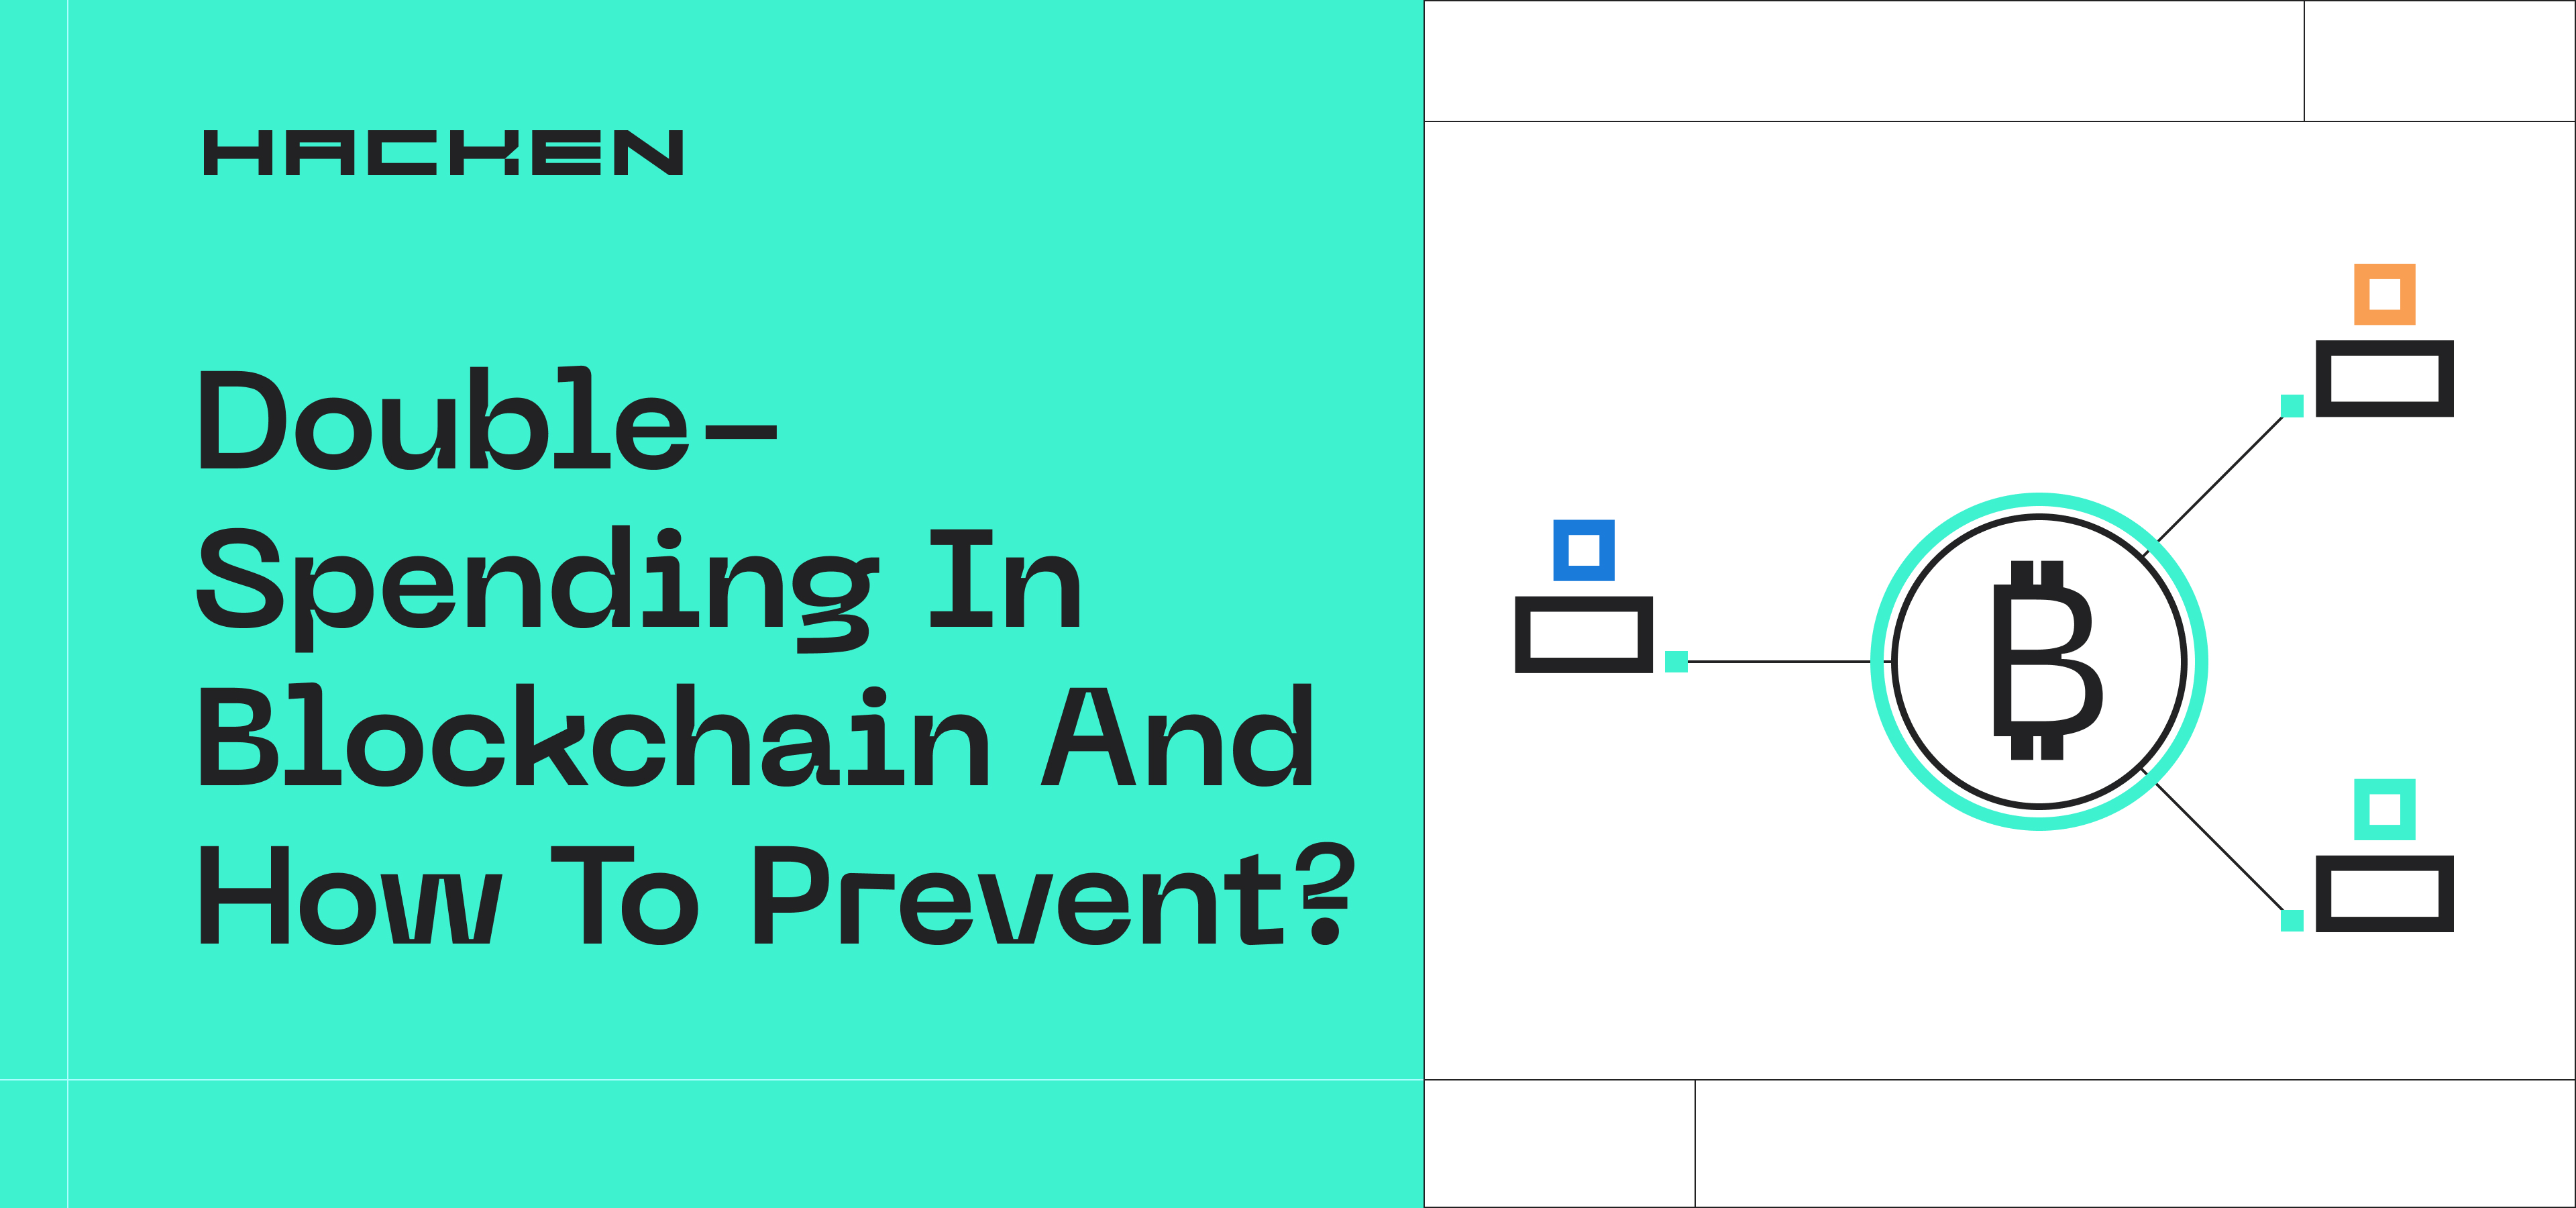 Double-Spending in Blockchain and How to Prevent?